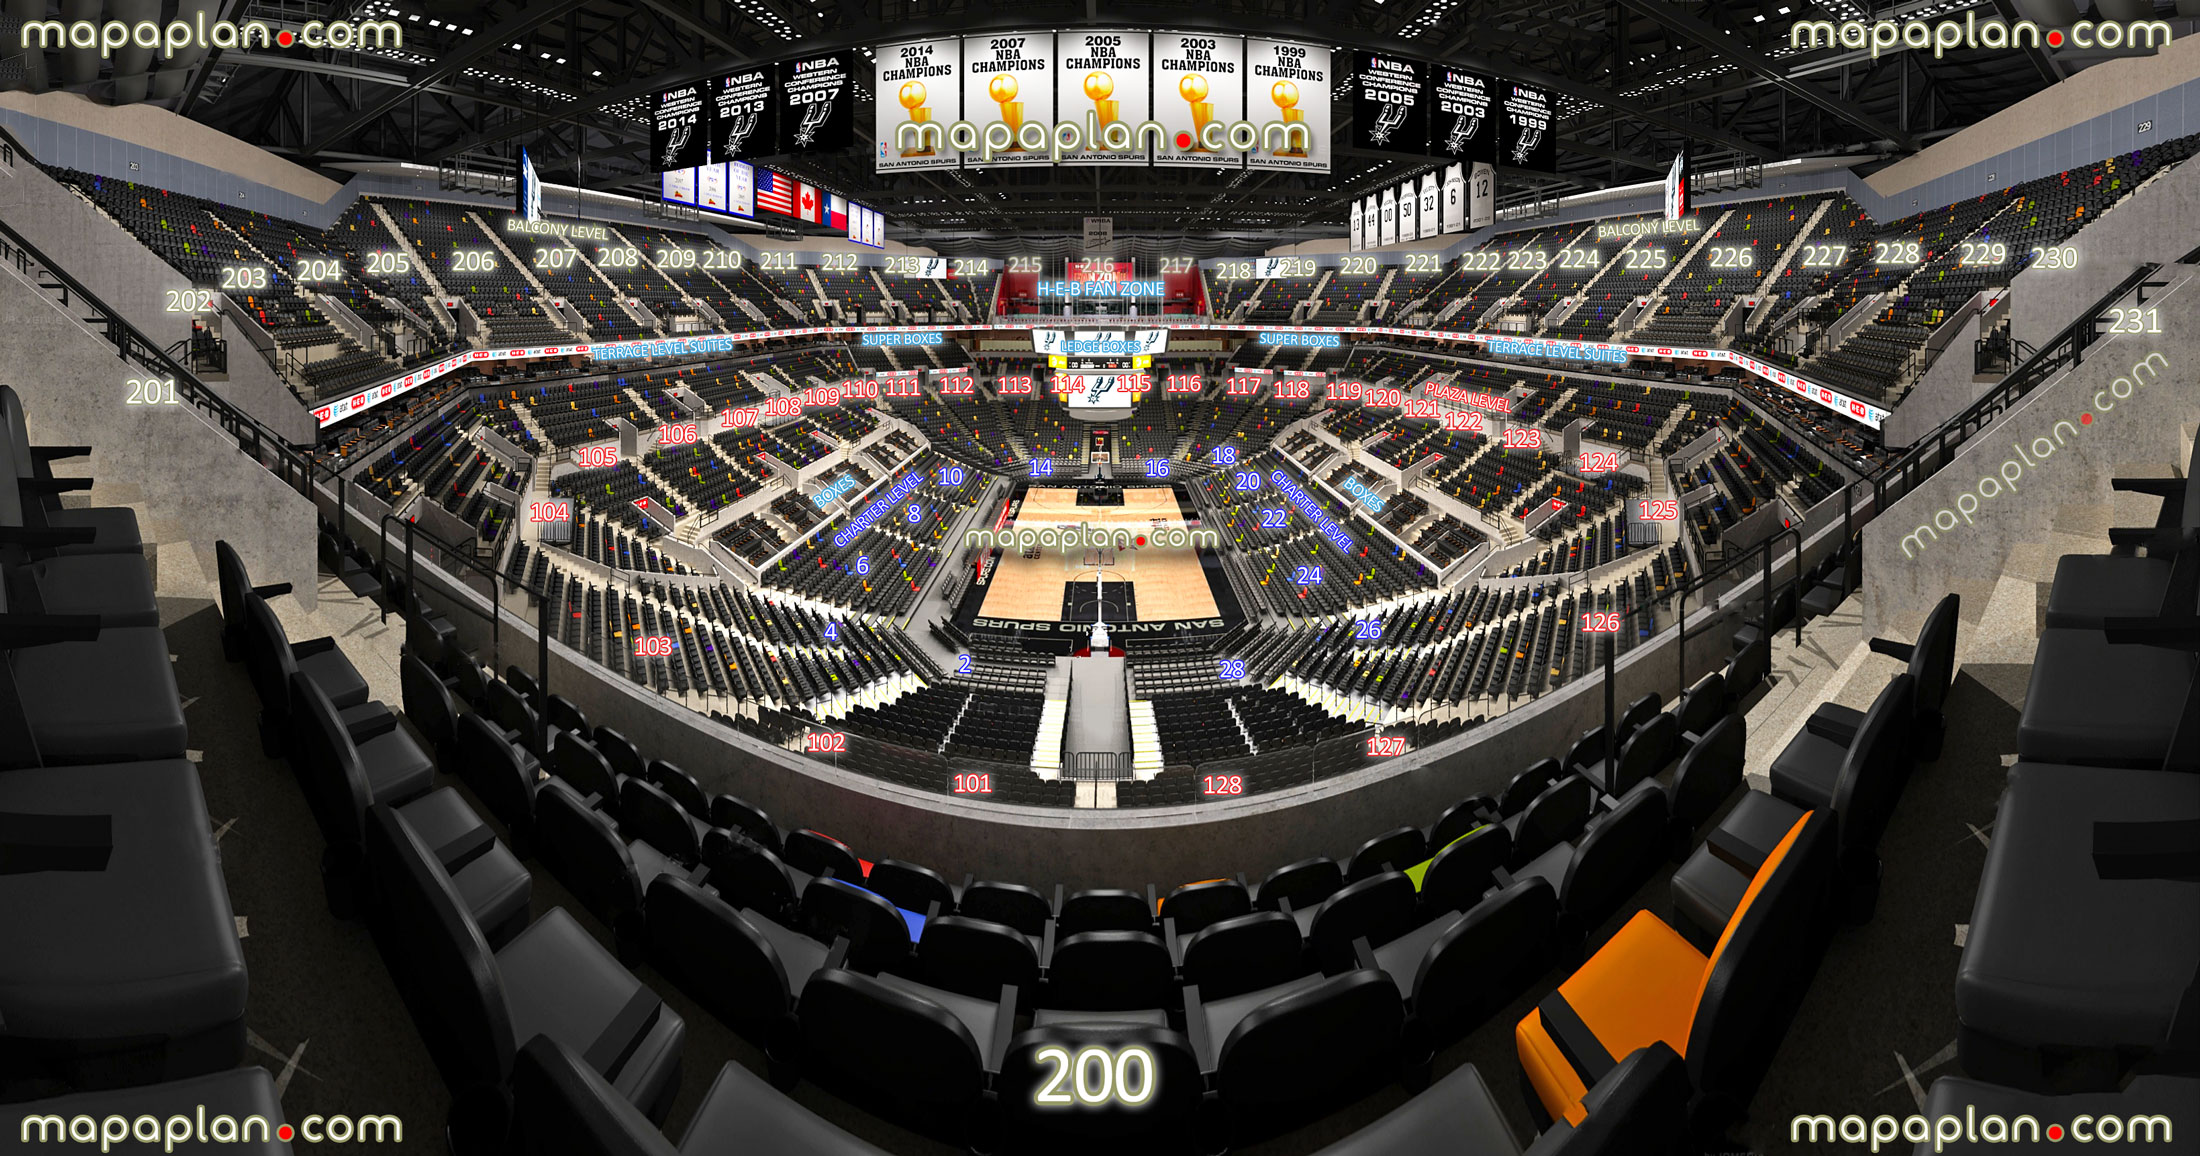 view section 200 row 5 seat 8 spurs silver stars basketball best seat selection information guide virtual interactive image map balcony level sections 200 201 202 203 204 205 206 207 208 209 210 211 212 213 214 215 216 217 218 219 220 221 222 223 224 225 226 227 228 229 230 231 San Antonio ATT Center seating chart